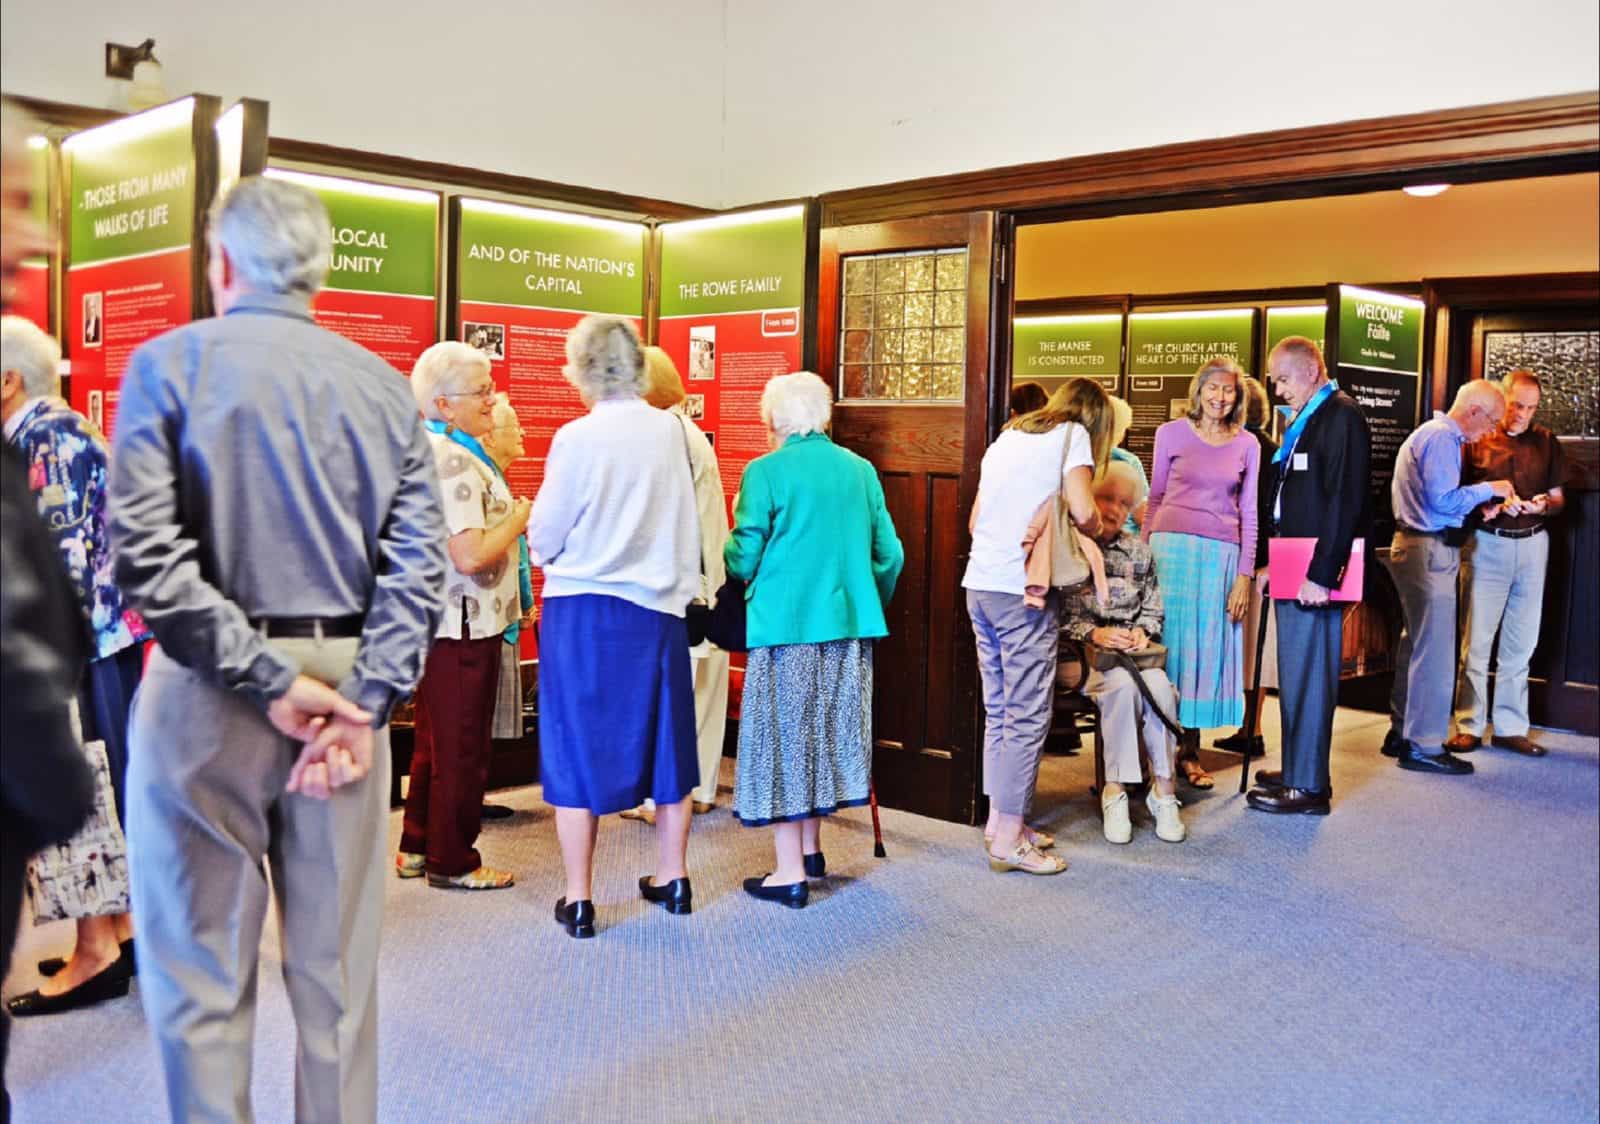 People viewing exhibition at inside the Church